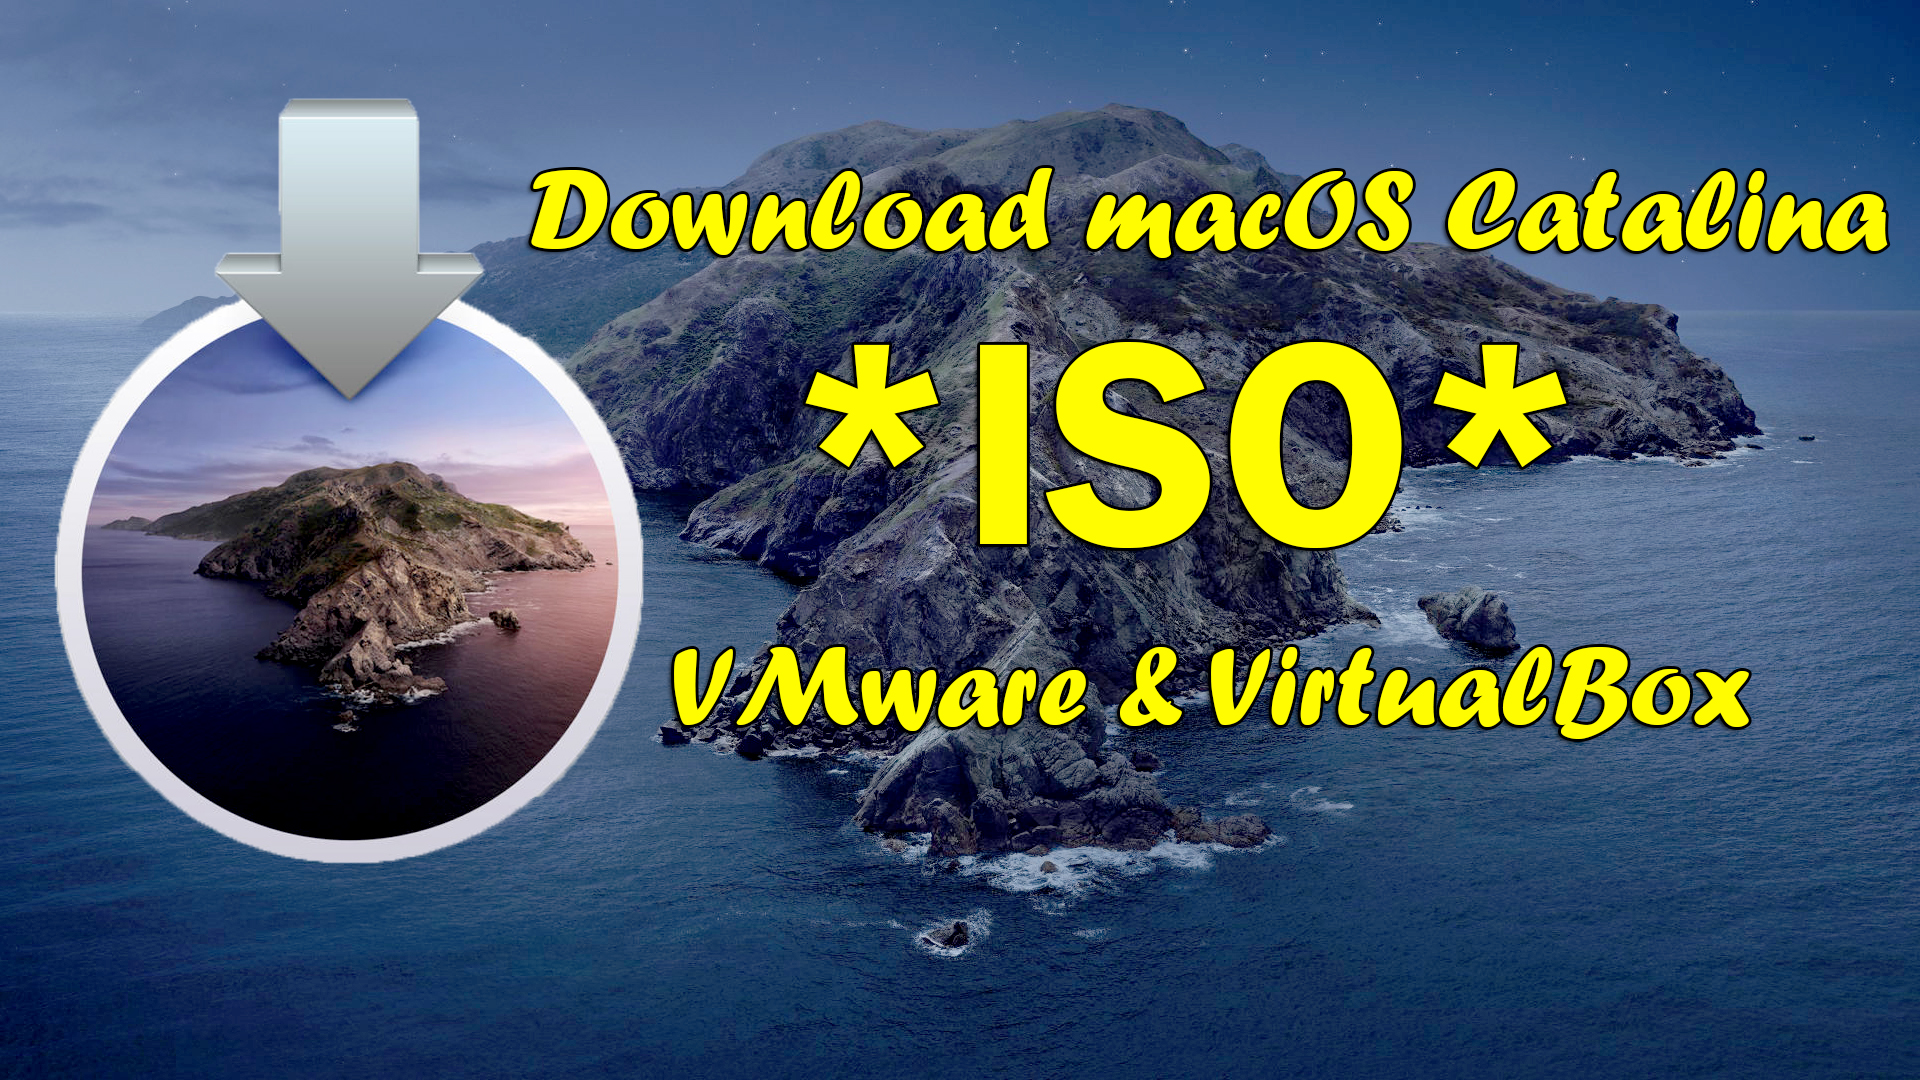 vmware for mac os x download